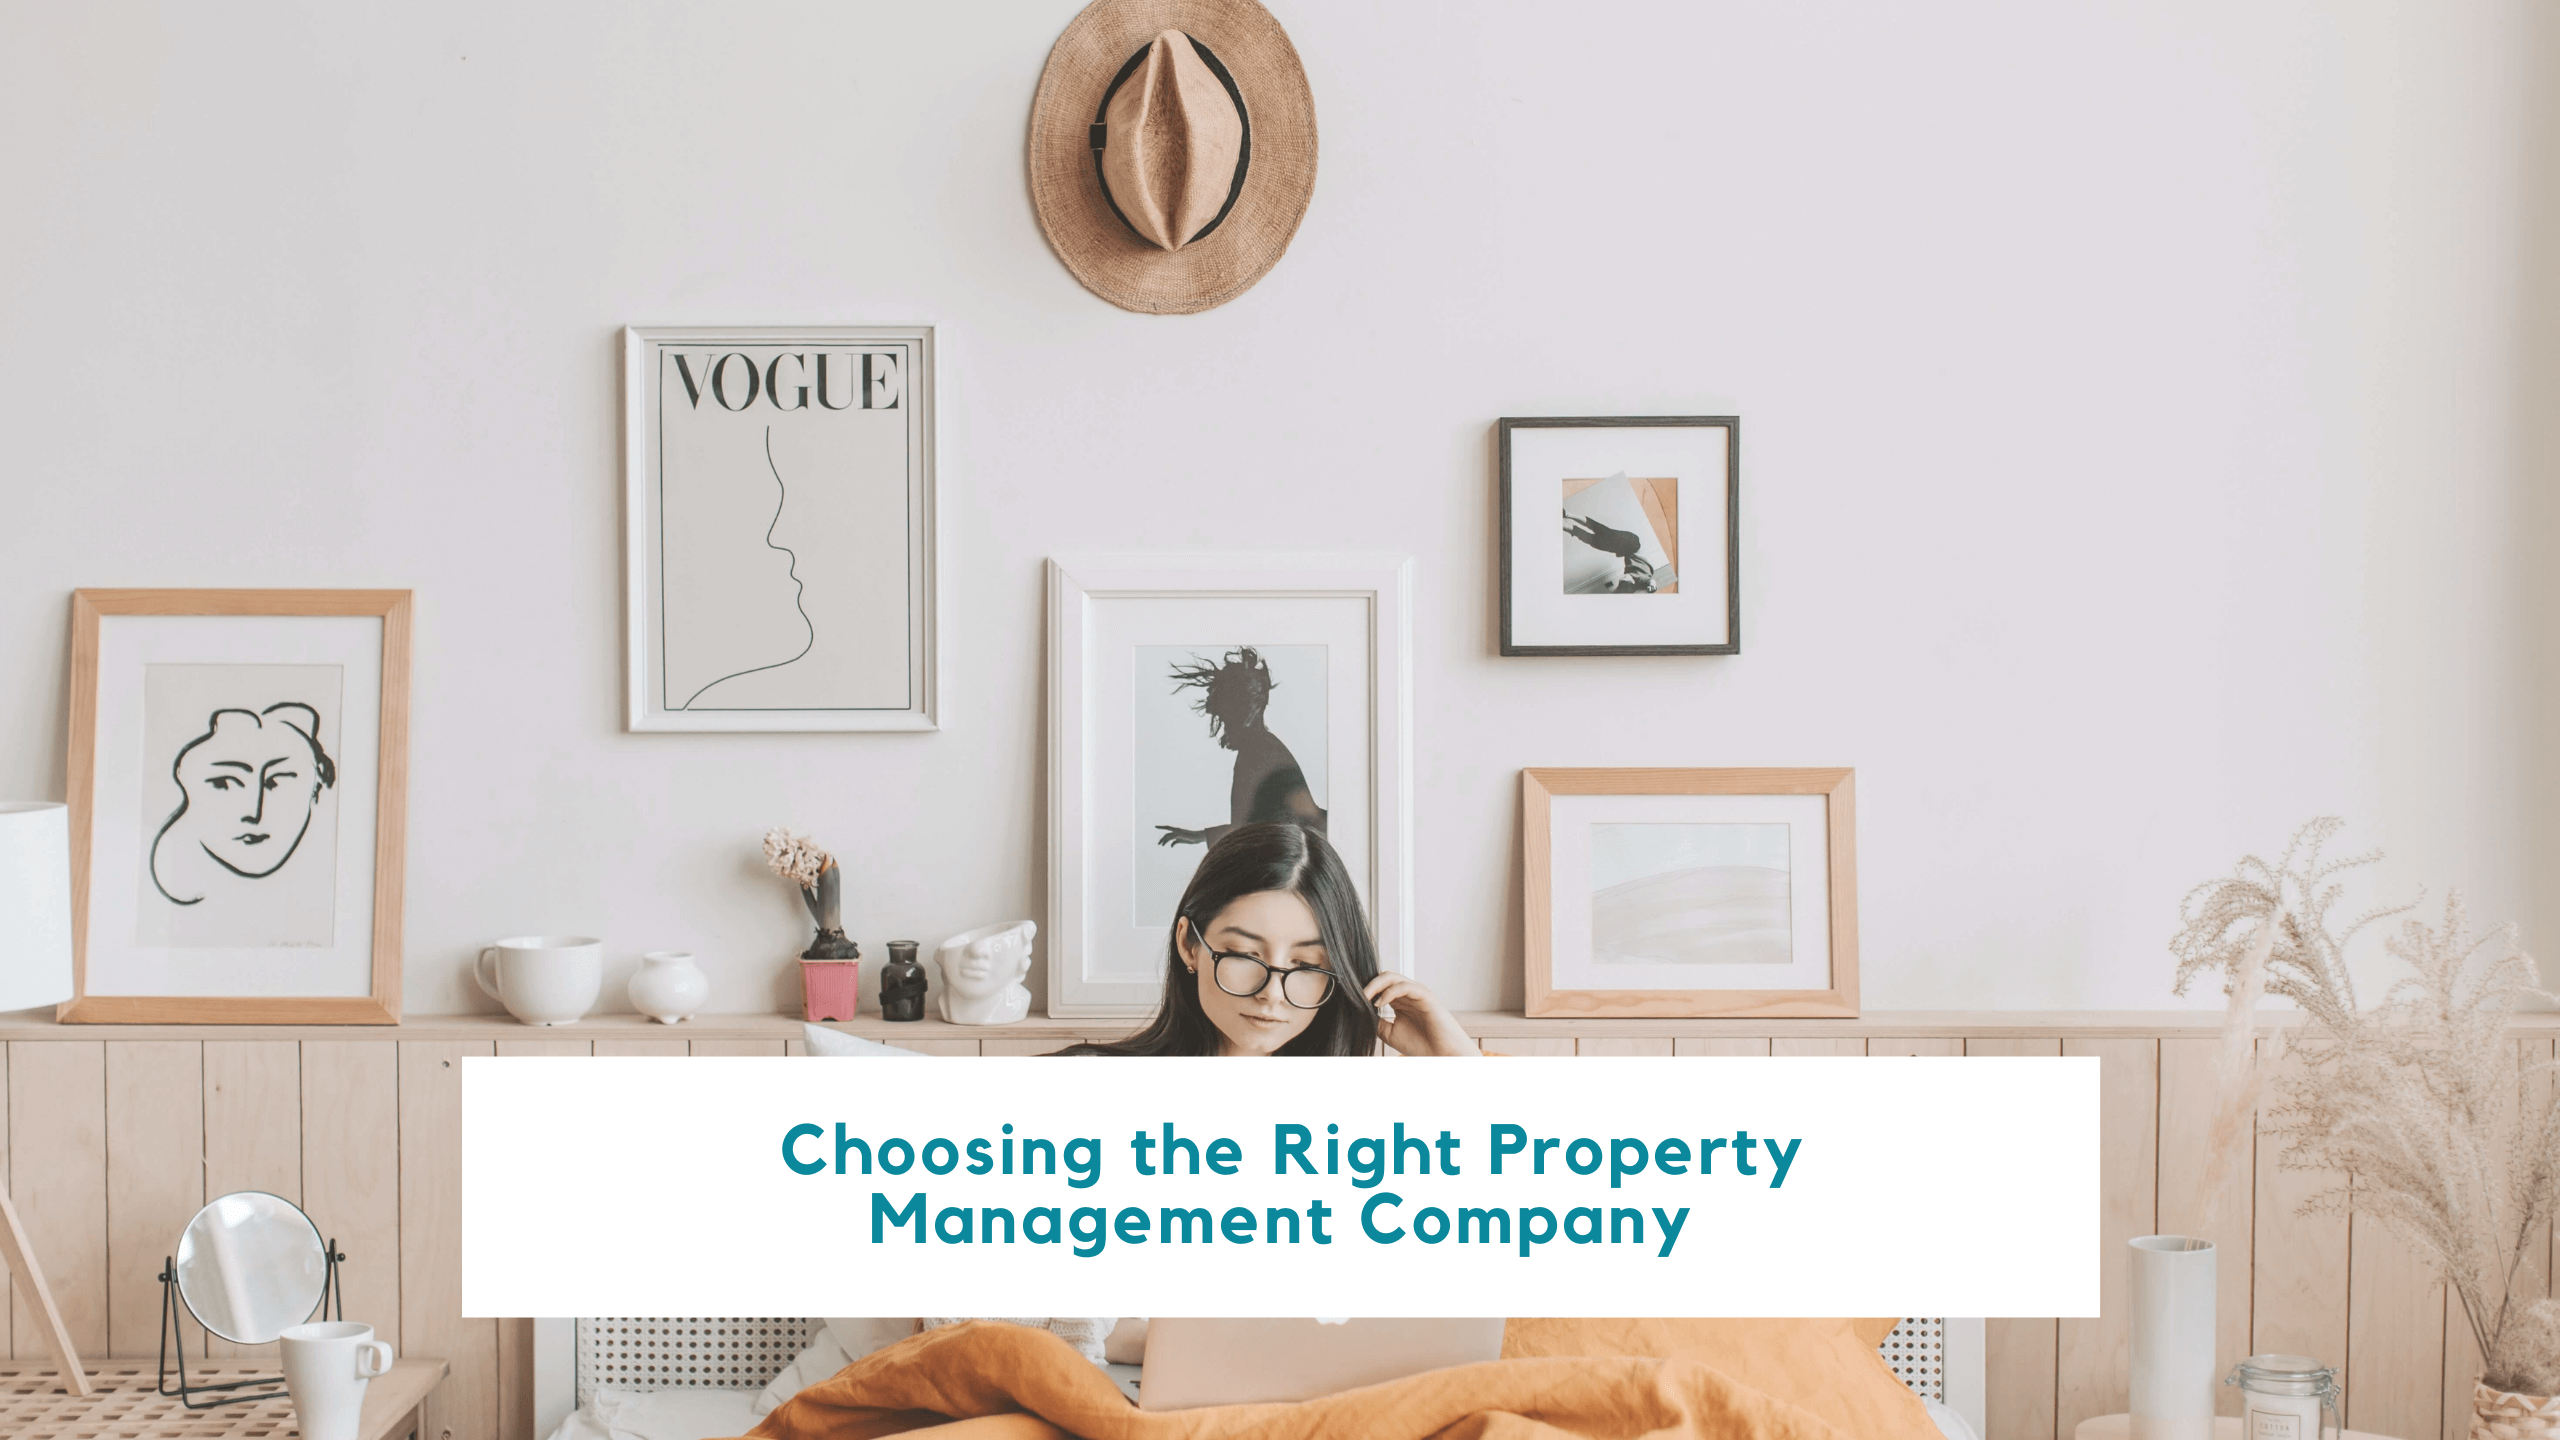 Tips on Choosing the Right Property Management Company for You and Your Property Type